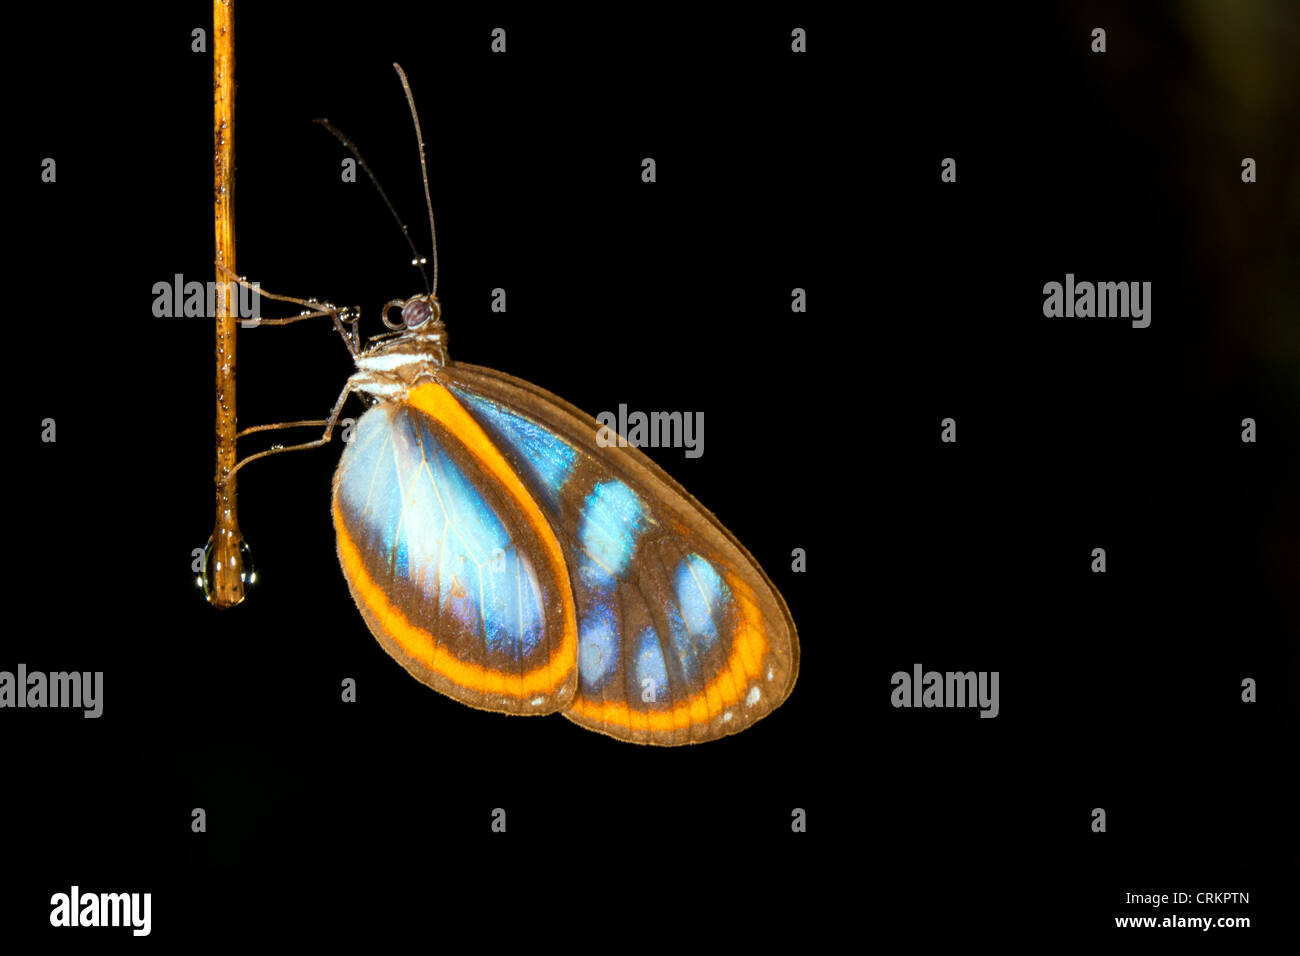 Transparent ithomine butterfly roosting on an aerial root in the rainforest at night Stock Photo